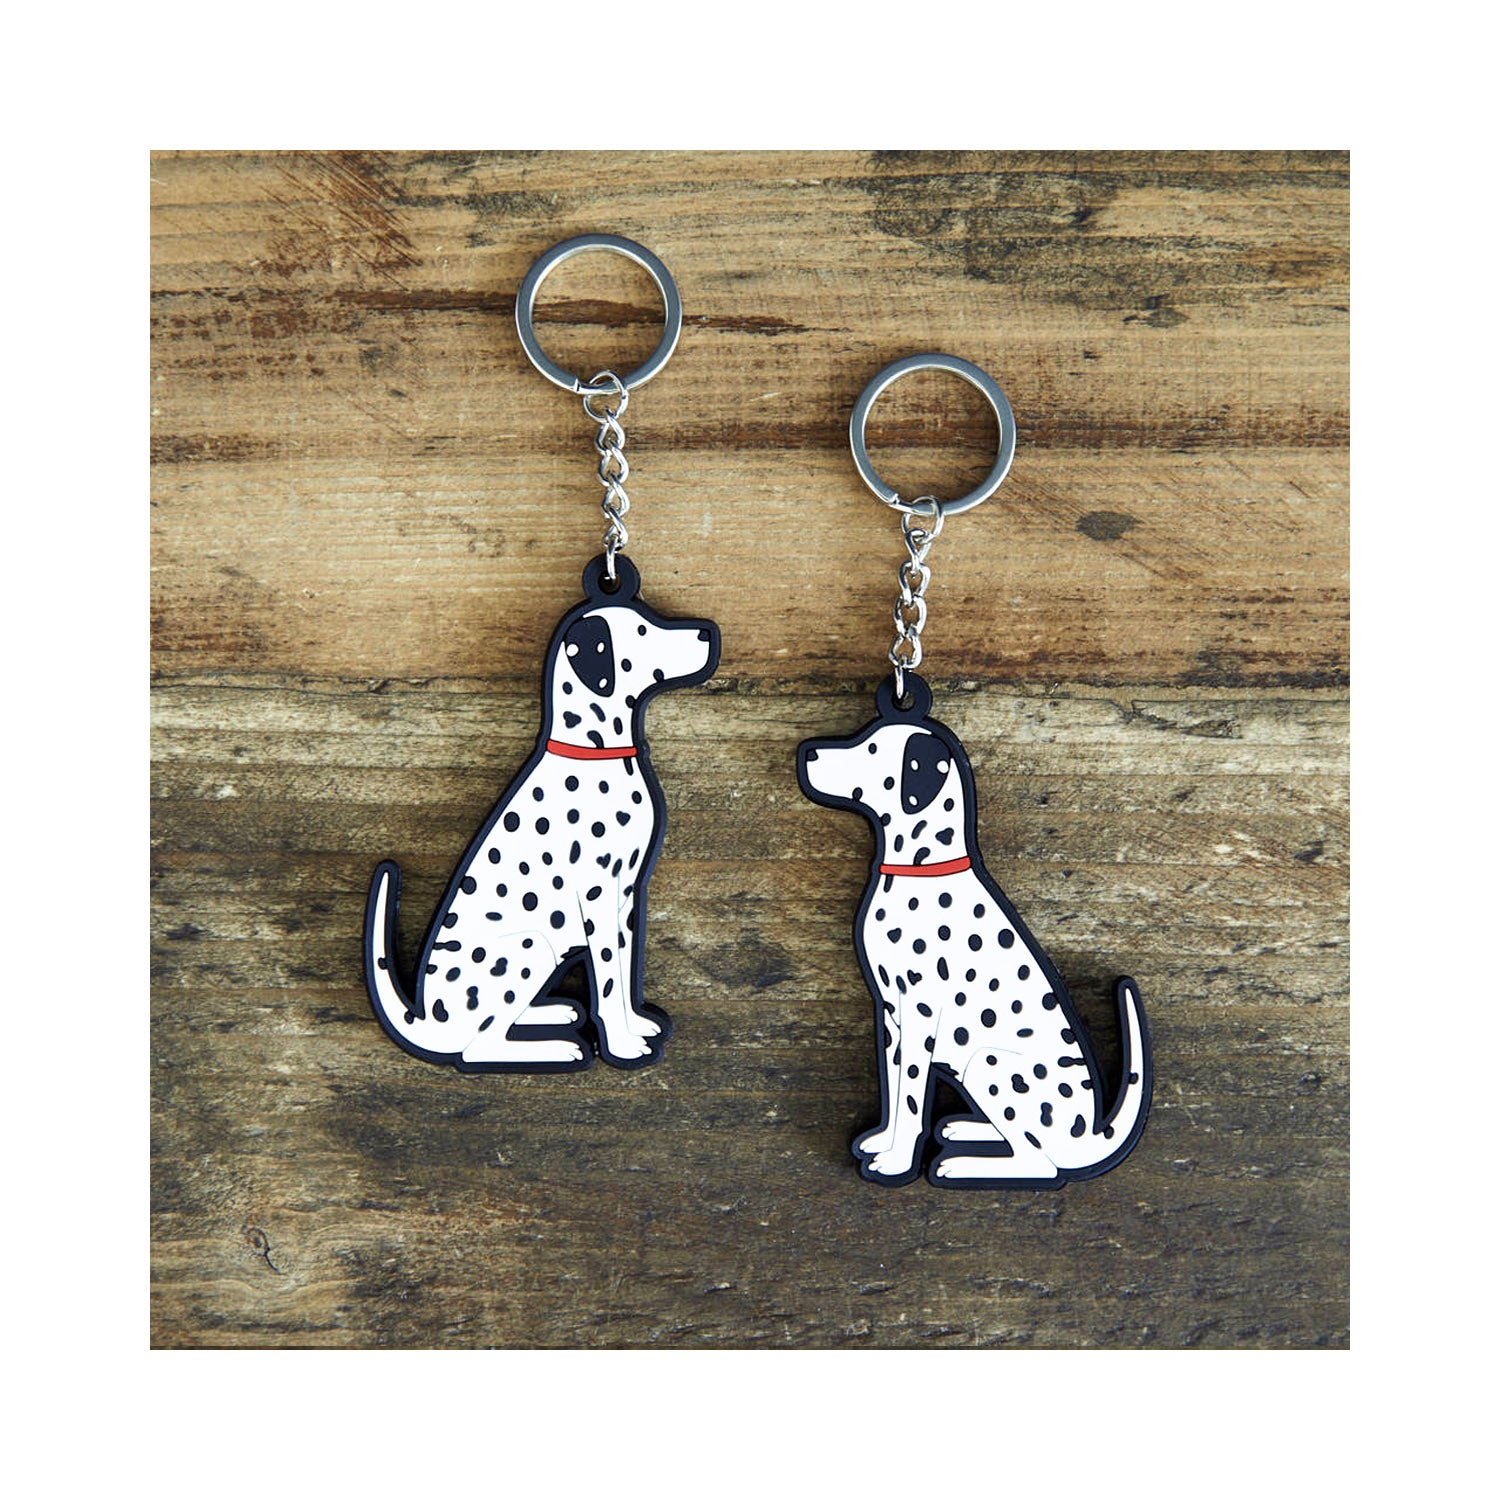 Dog Lover Gifts available at Dog Krazy Gifts - Hector The Dalmatian Keyring - part of the Sweet William range available from Dog Krazy Gifts